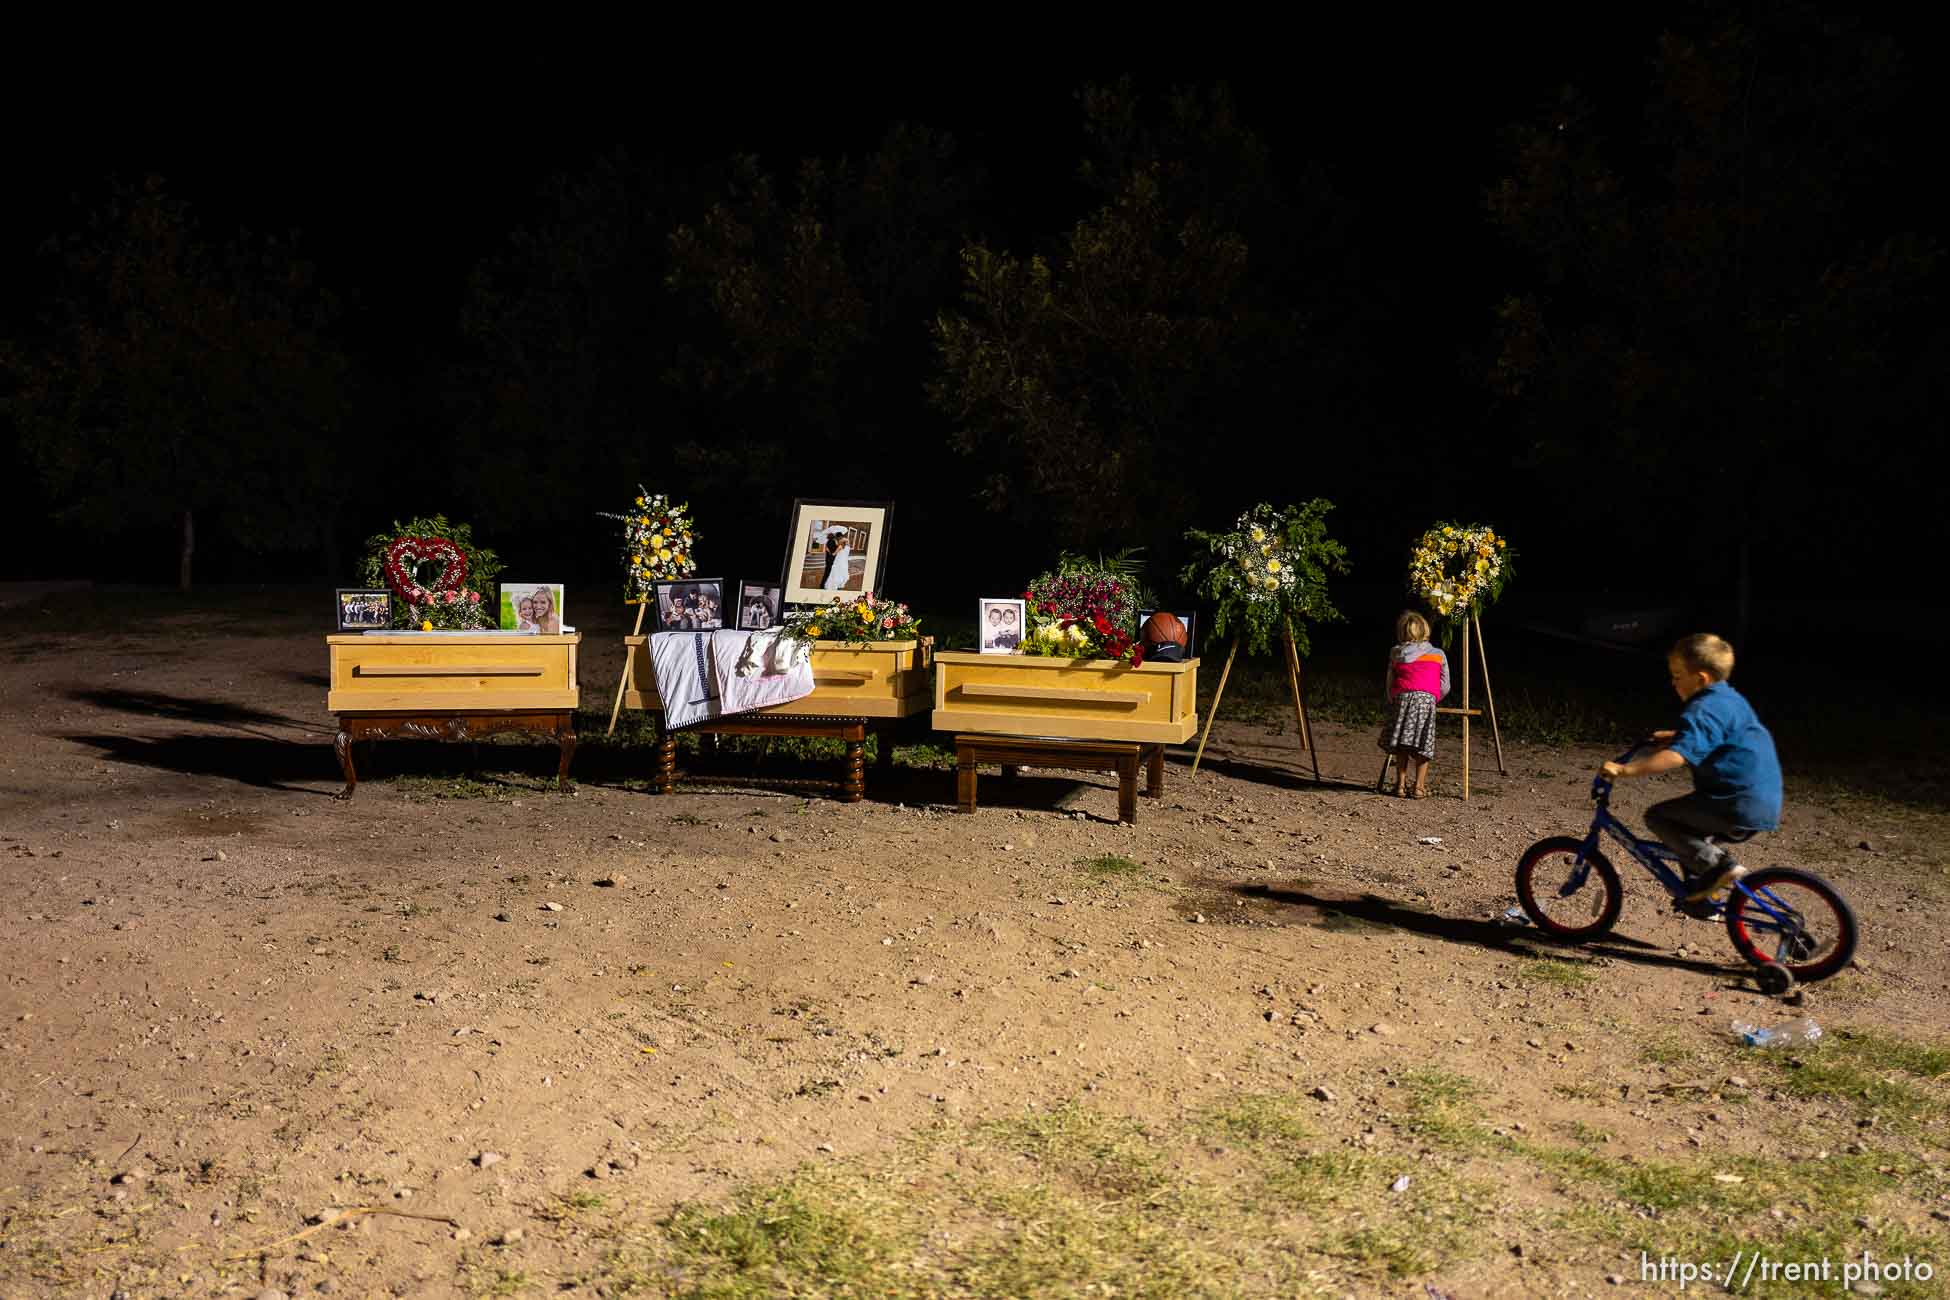 (Trent Nelson  |  The Salt Lake Tribune)
The childrens' caskets and photgraphs on display following the funeral for Rhonita Miller and four of her children in La Mora, Sonora on Thursday Nov. 7, 2019.